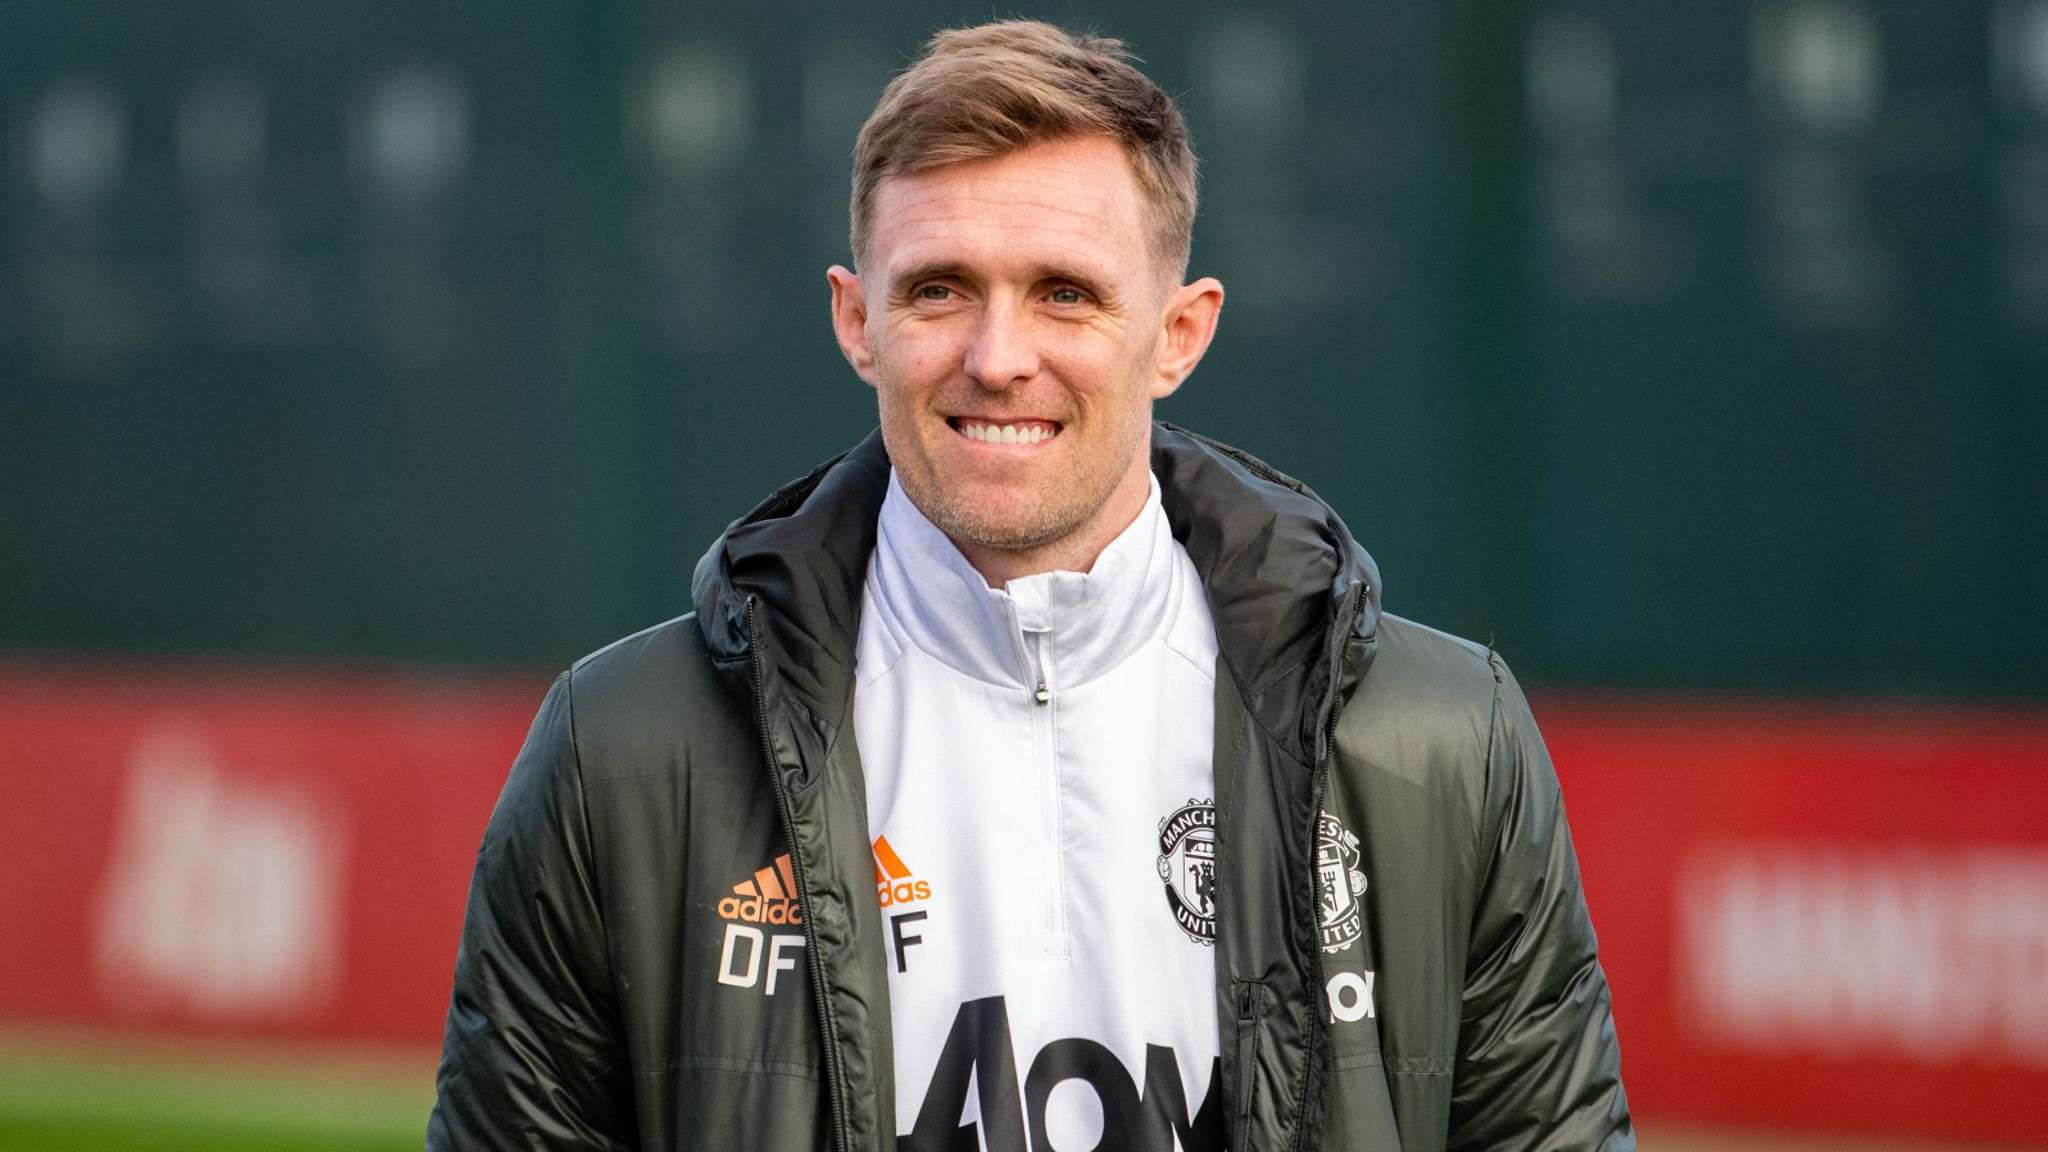 Manchester United have promoted Darren Fletcher to a first-team coaching role